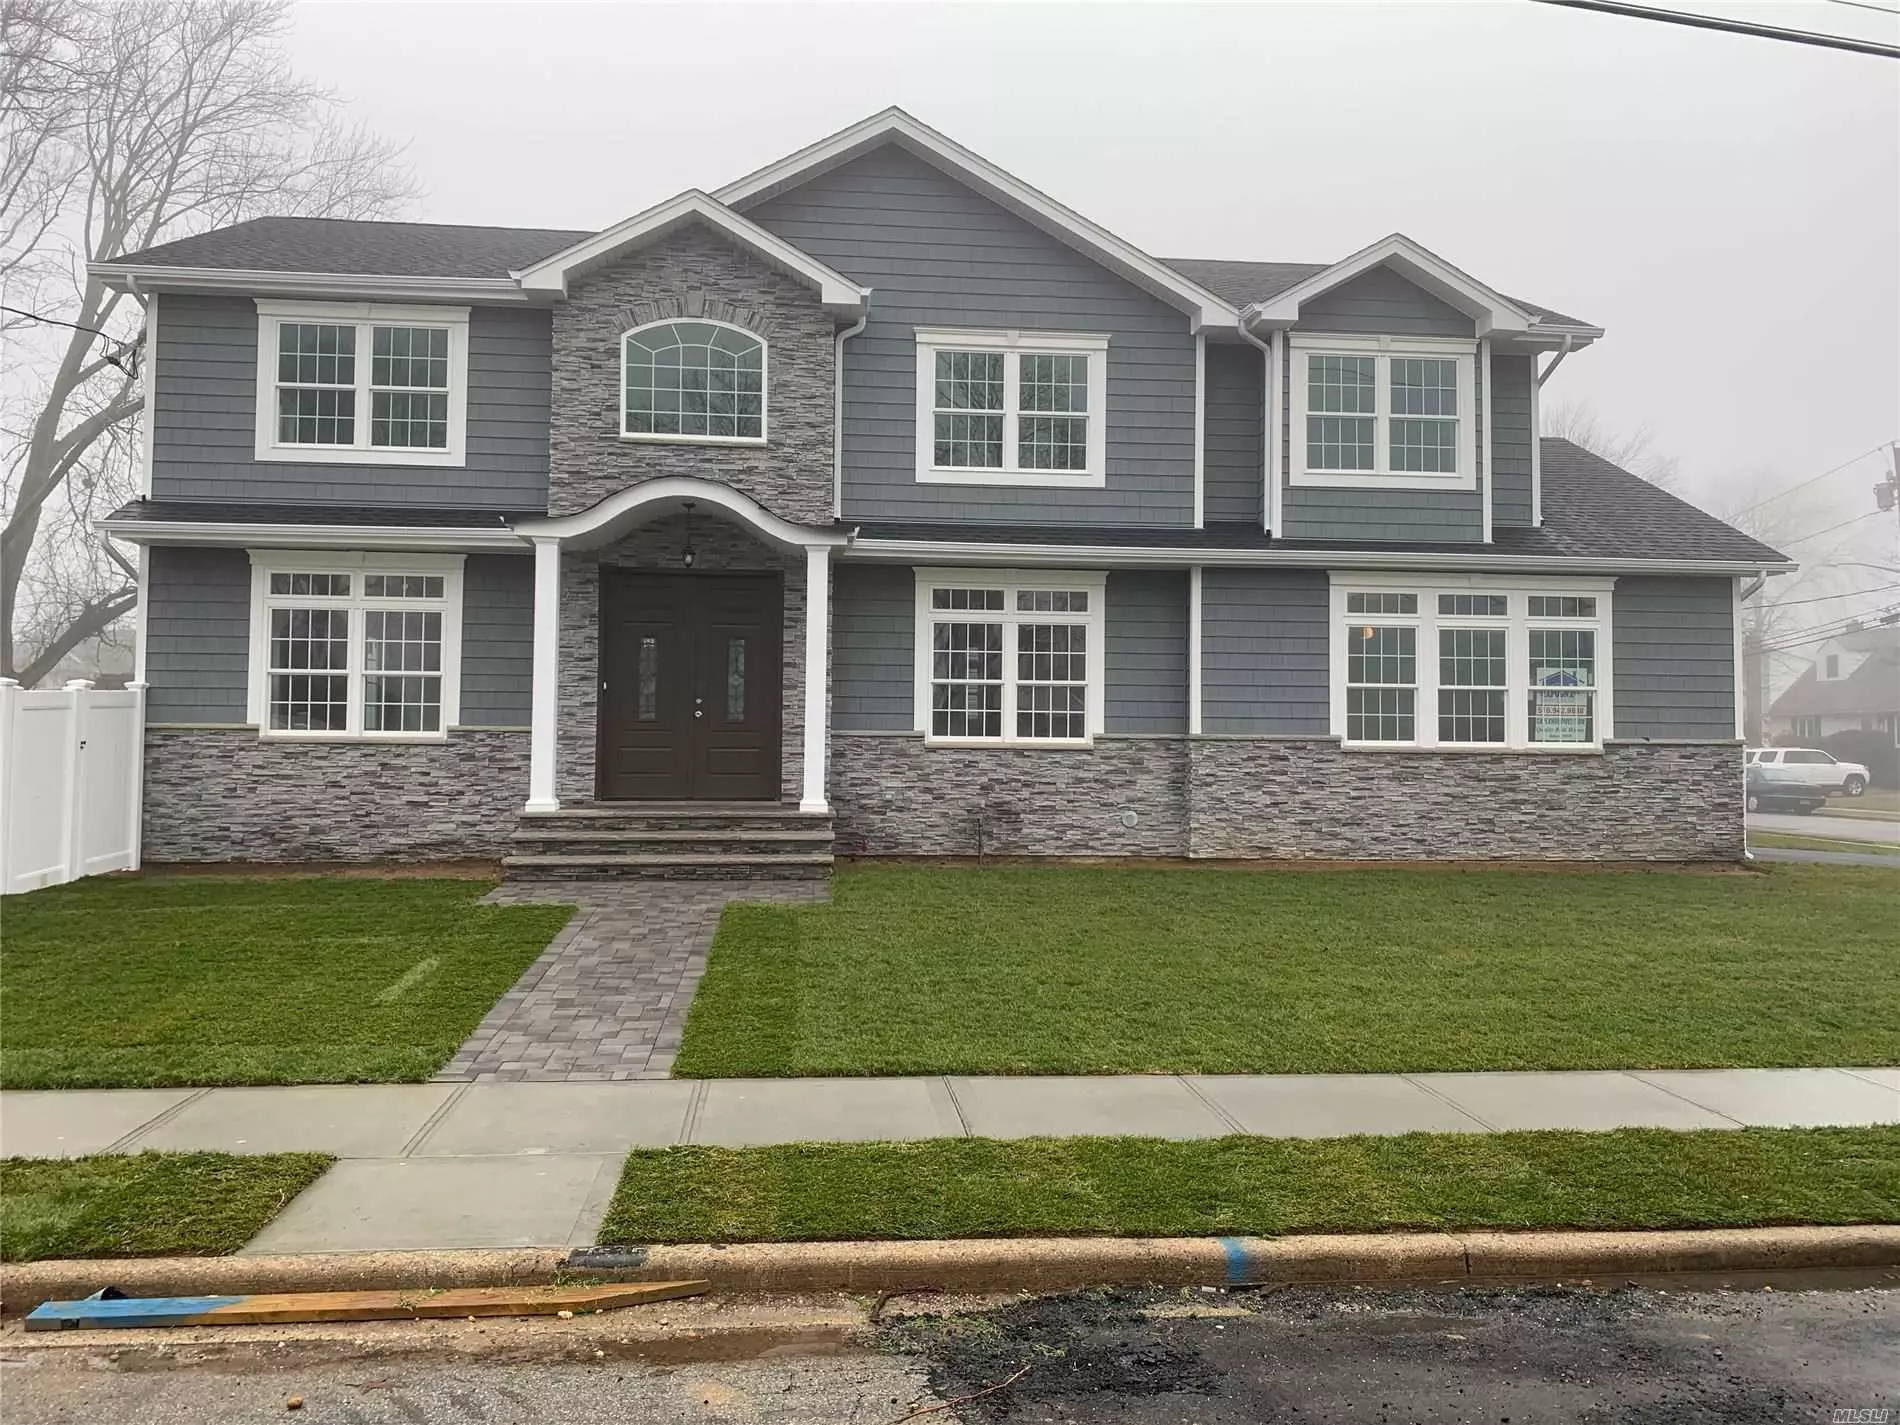 All Pictures are of a similar Home Built By The Builder. Home Not Built Plenty of Time to Pick colors and Customize! New Custom Colonial By Established Builder.5 bedrooms 3 Baths 2 Car Garage, 3205 interior sq FT. Custom EIk with quartz counter, All High End Finishes